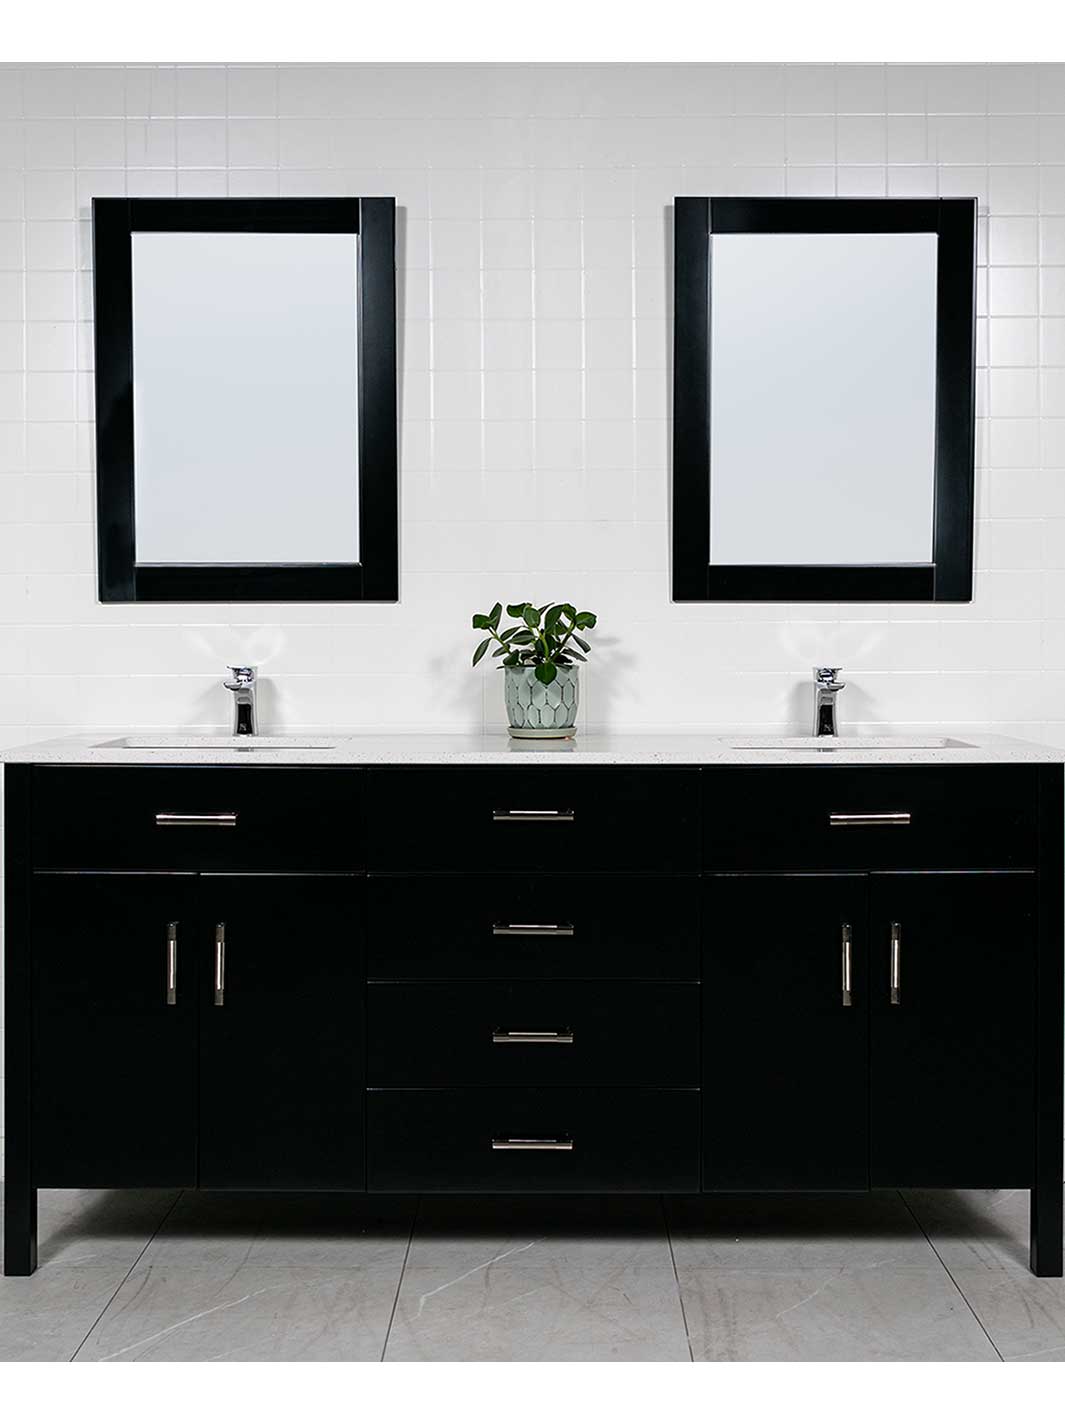 72 inch double vanity with black cabinet and white counter. two matching wood framed mirrors